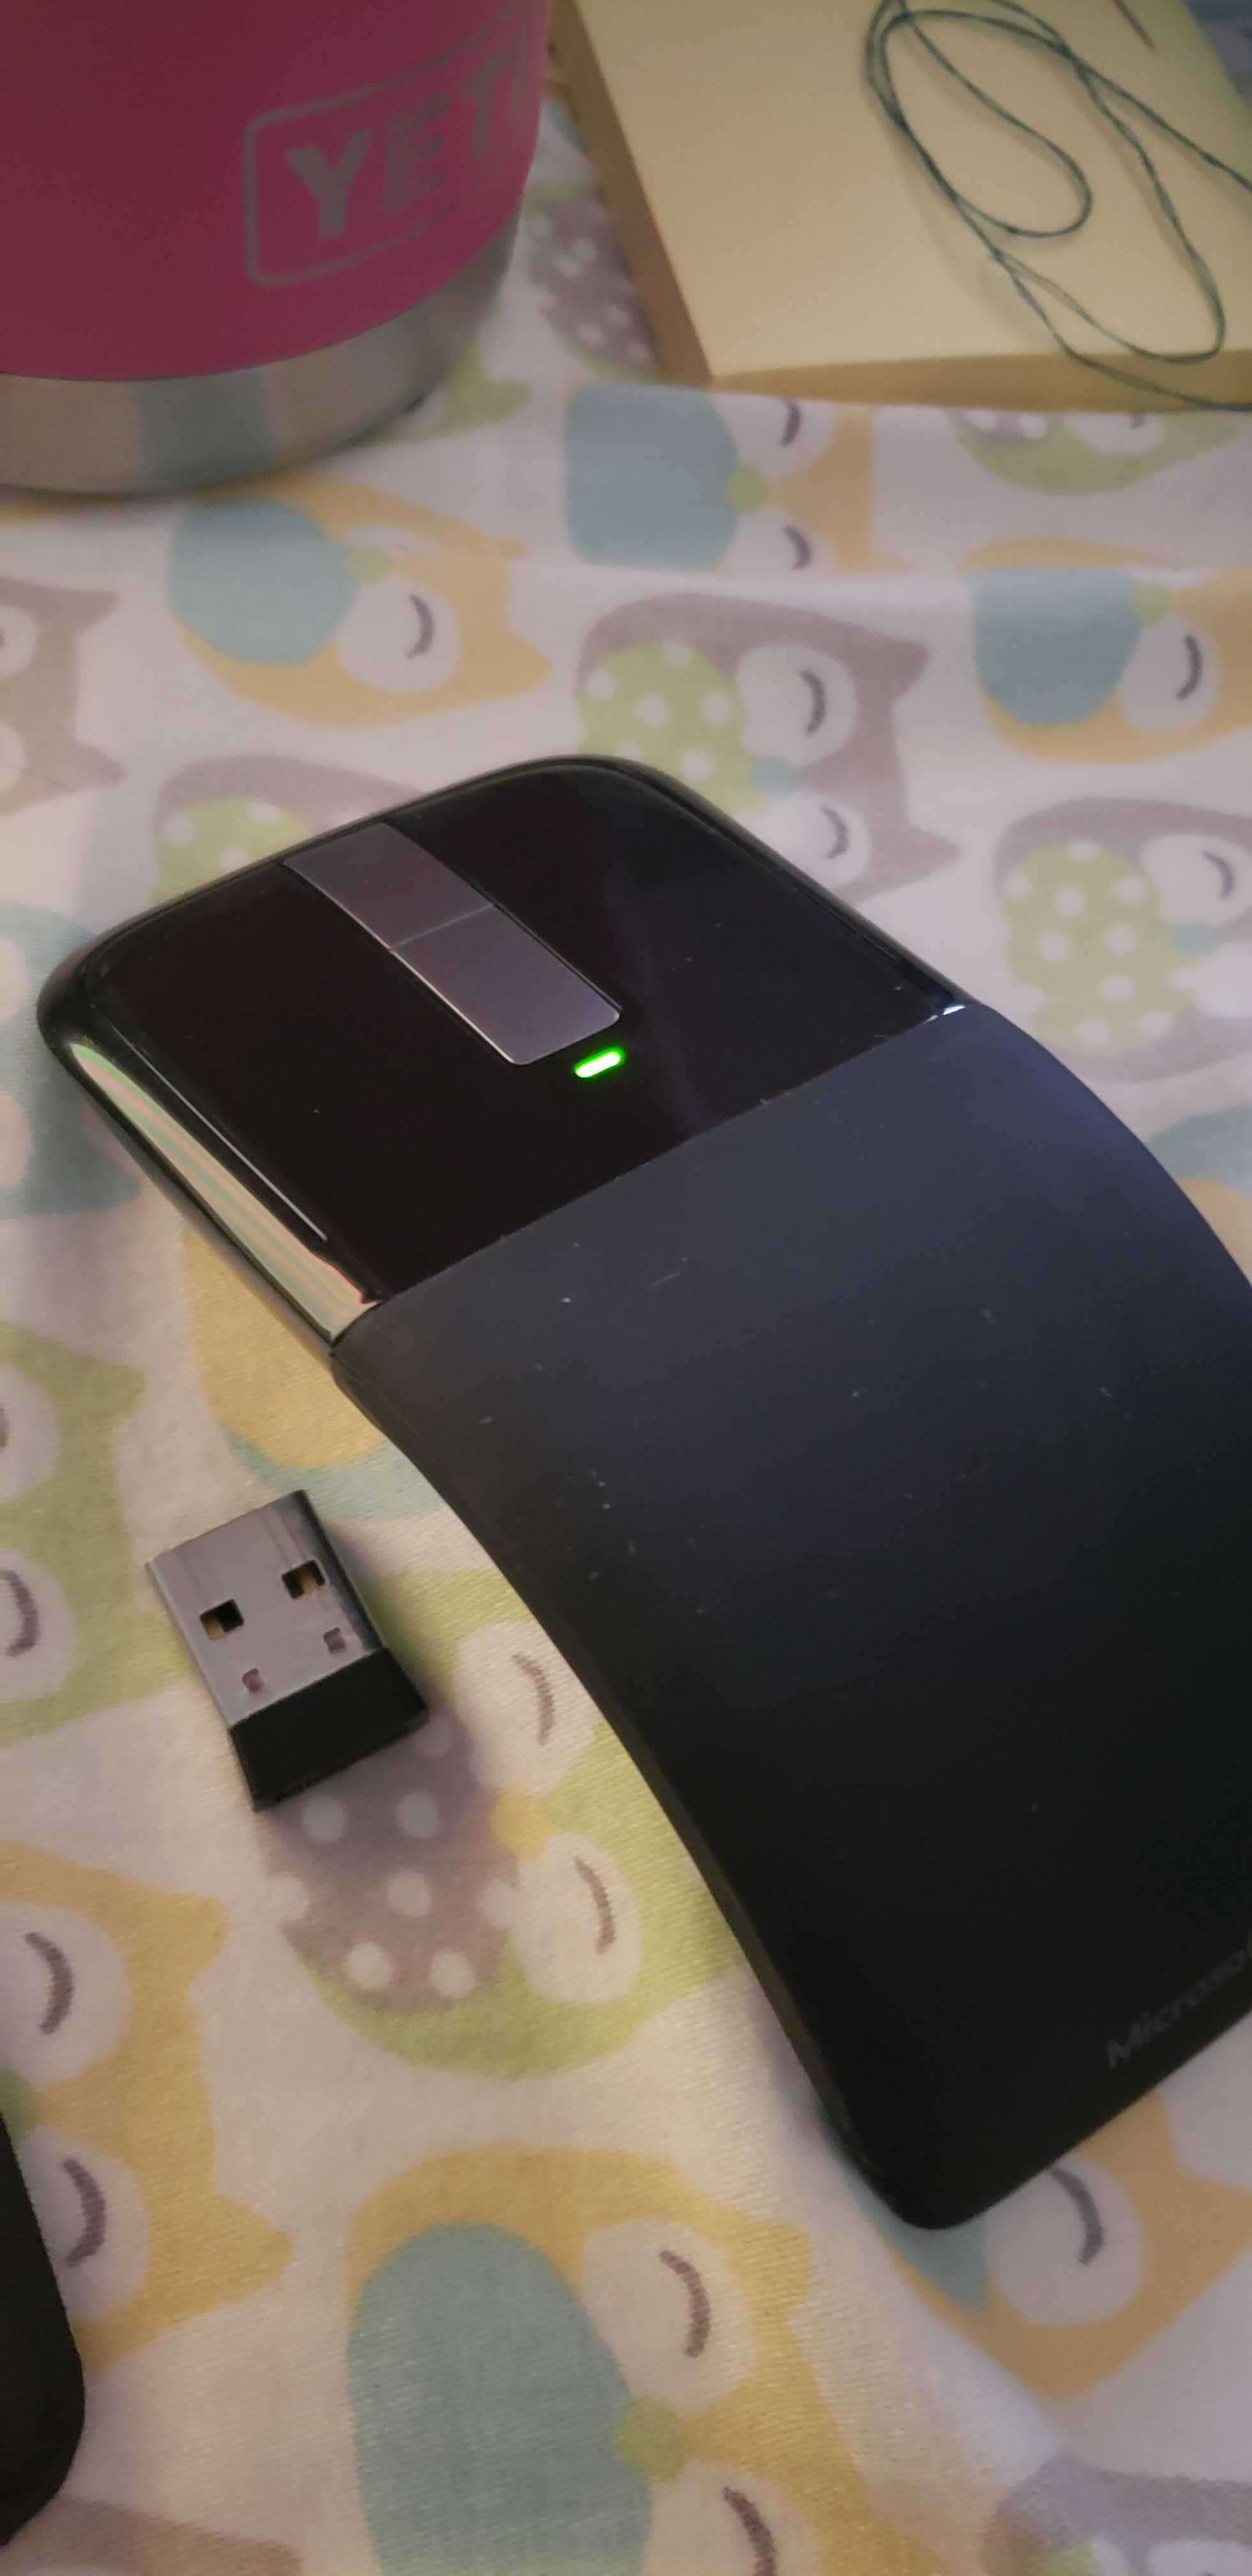 Wireless Arc Mouse No Longer Working a USB receiver) - Microsoft Community